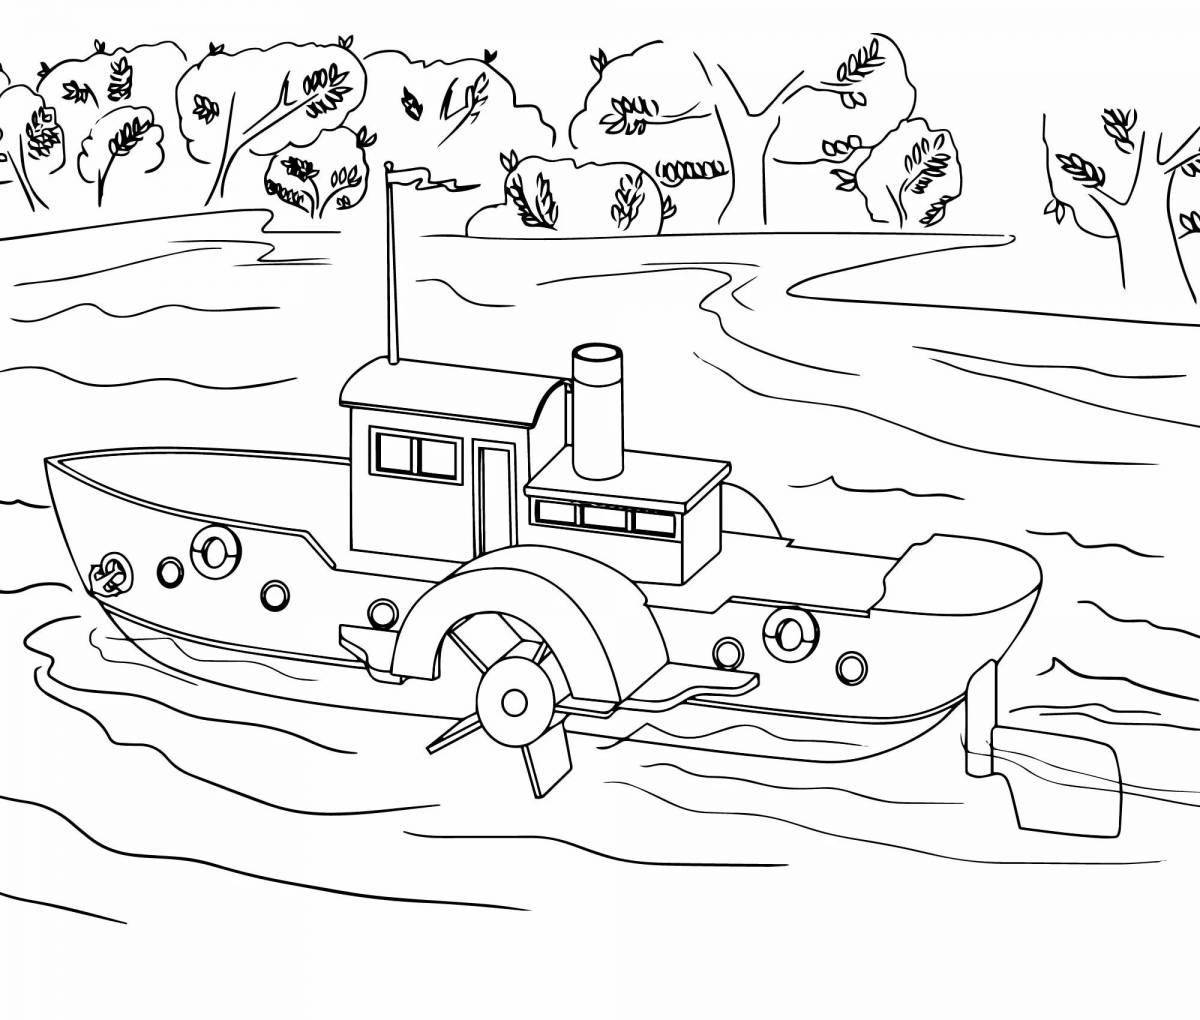 Playful steamship coloring page for kids